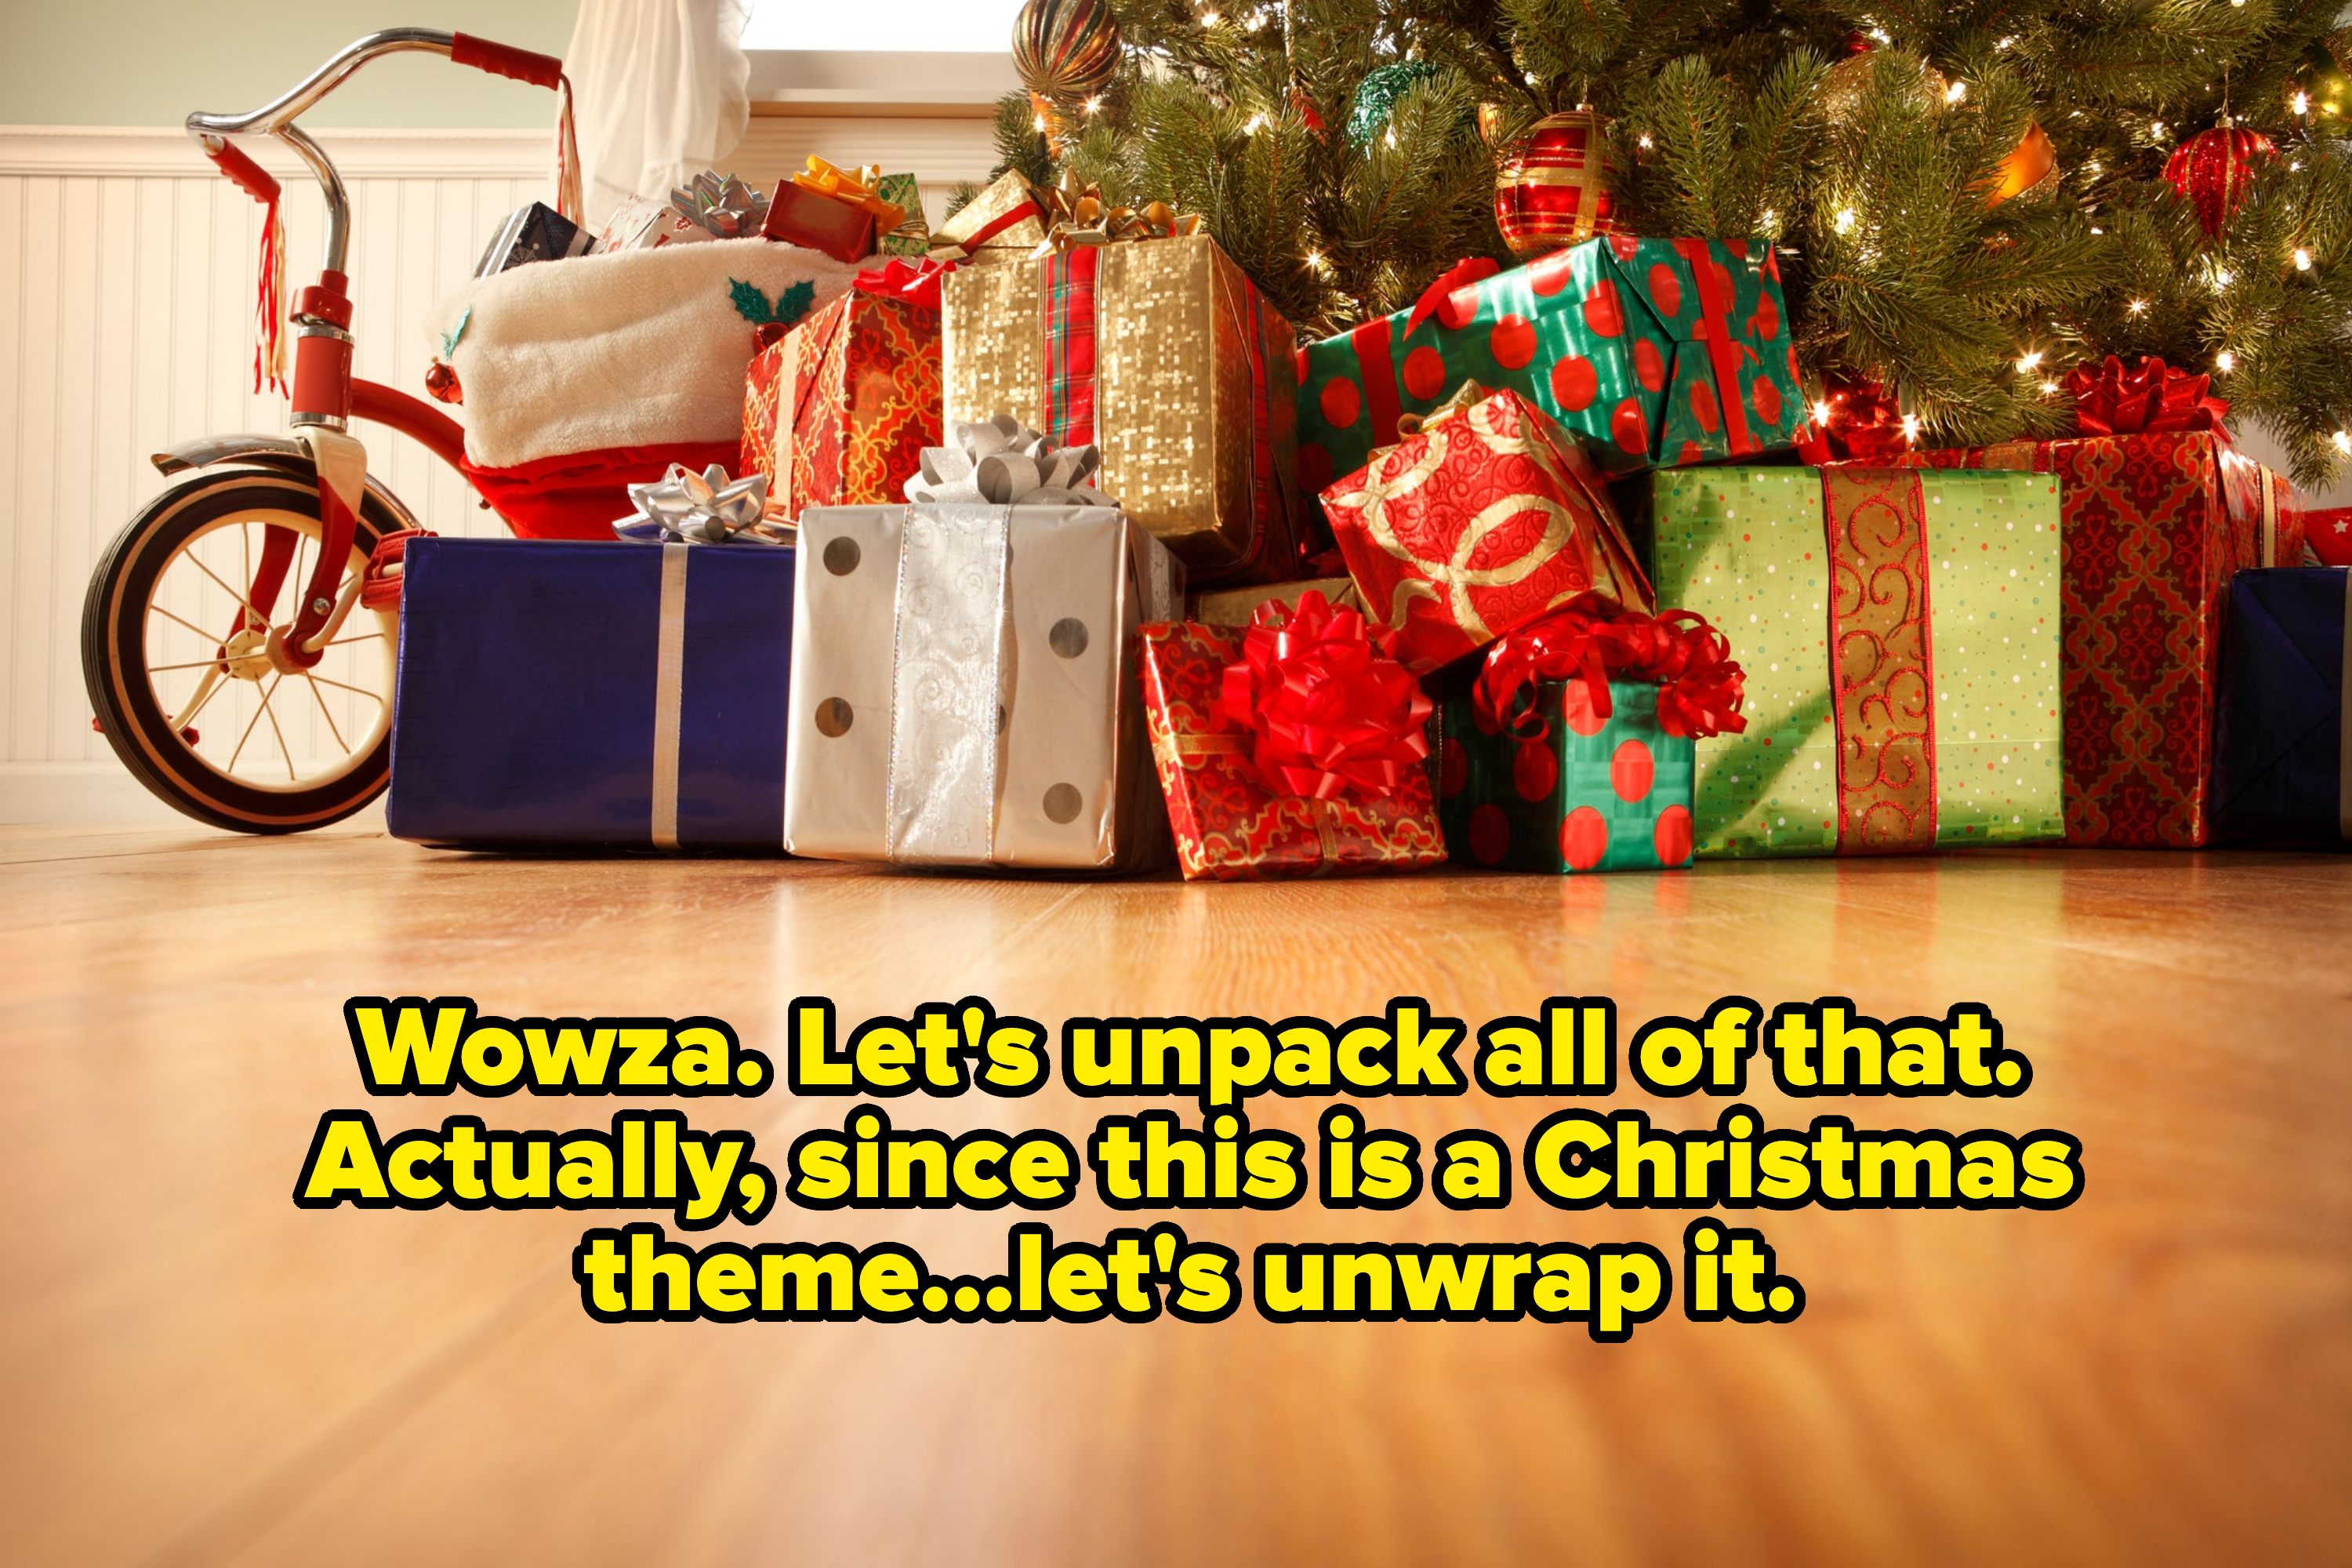 text that says, wowza, let&#x27;s unpack all of that, acutally since this is a christmas theme, let&#x27;s unwrap it